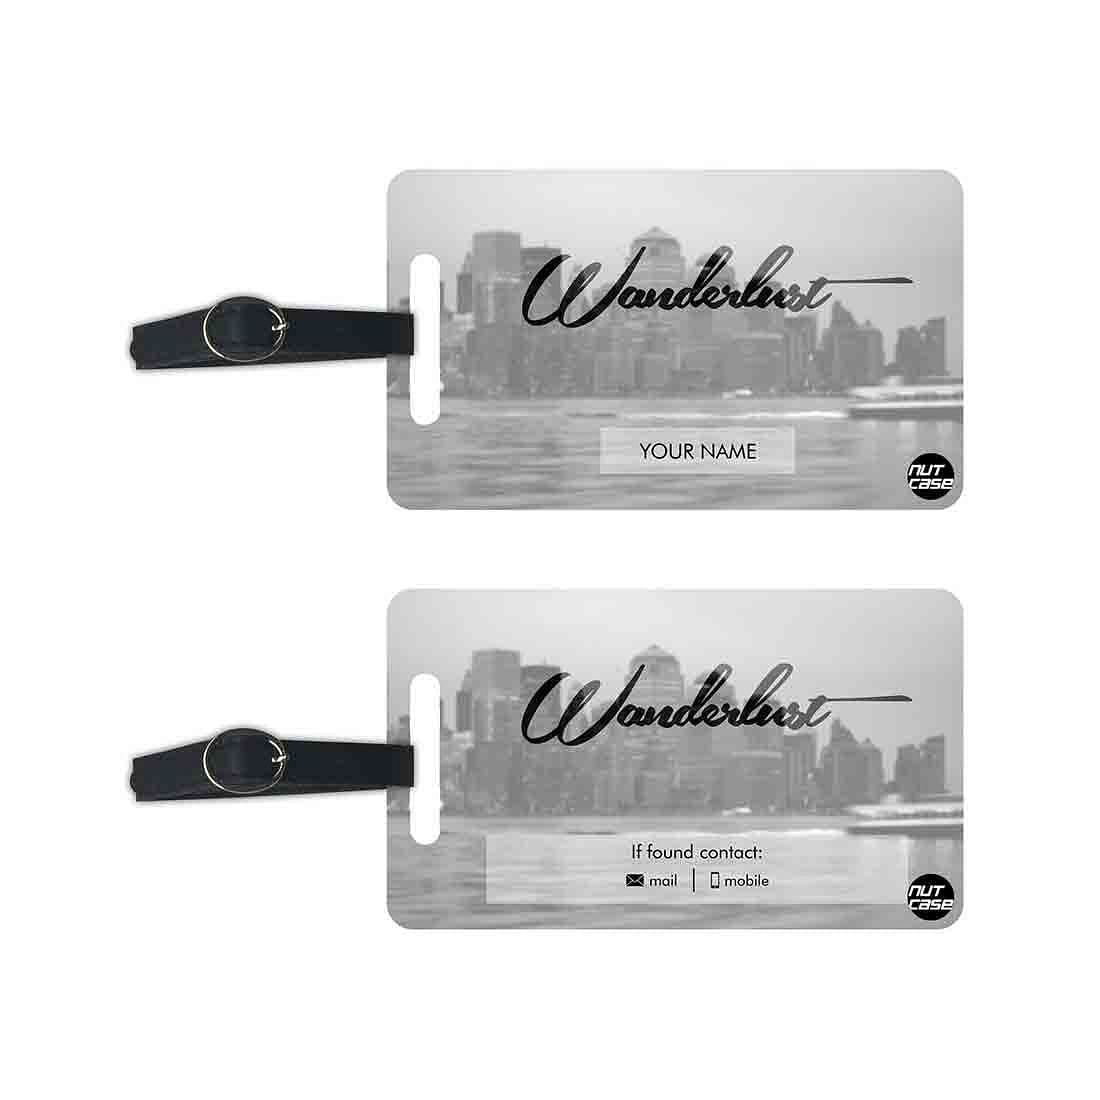 Customized Bag Luggage Tags Gift Set - Add your Name - Set of 2 Nutcase